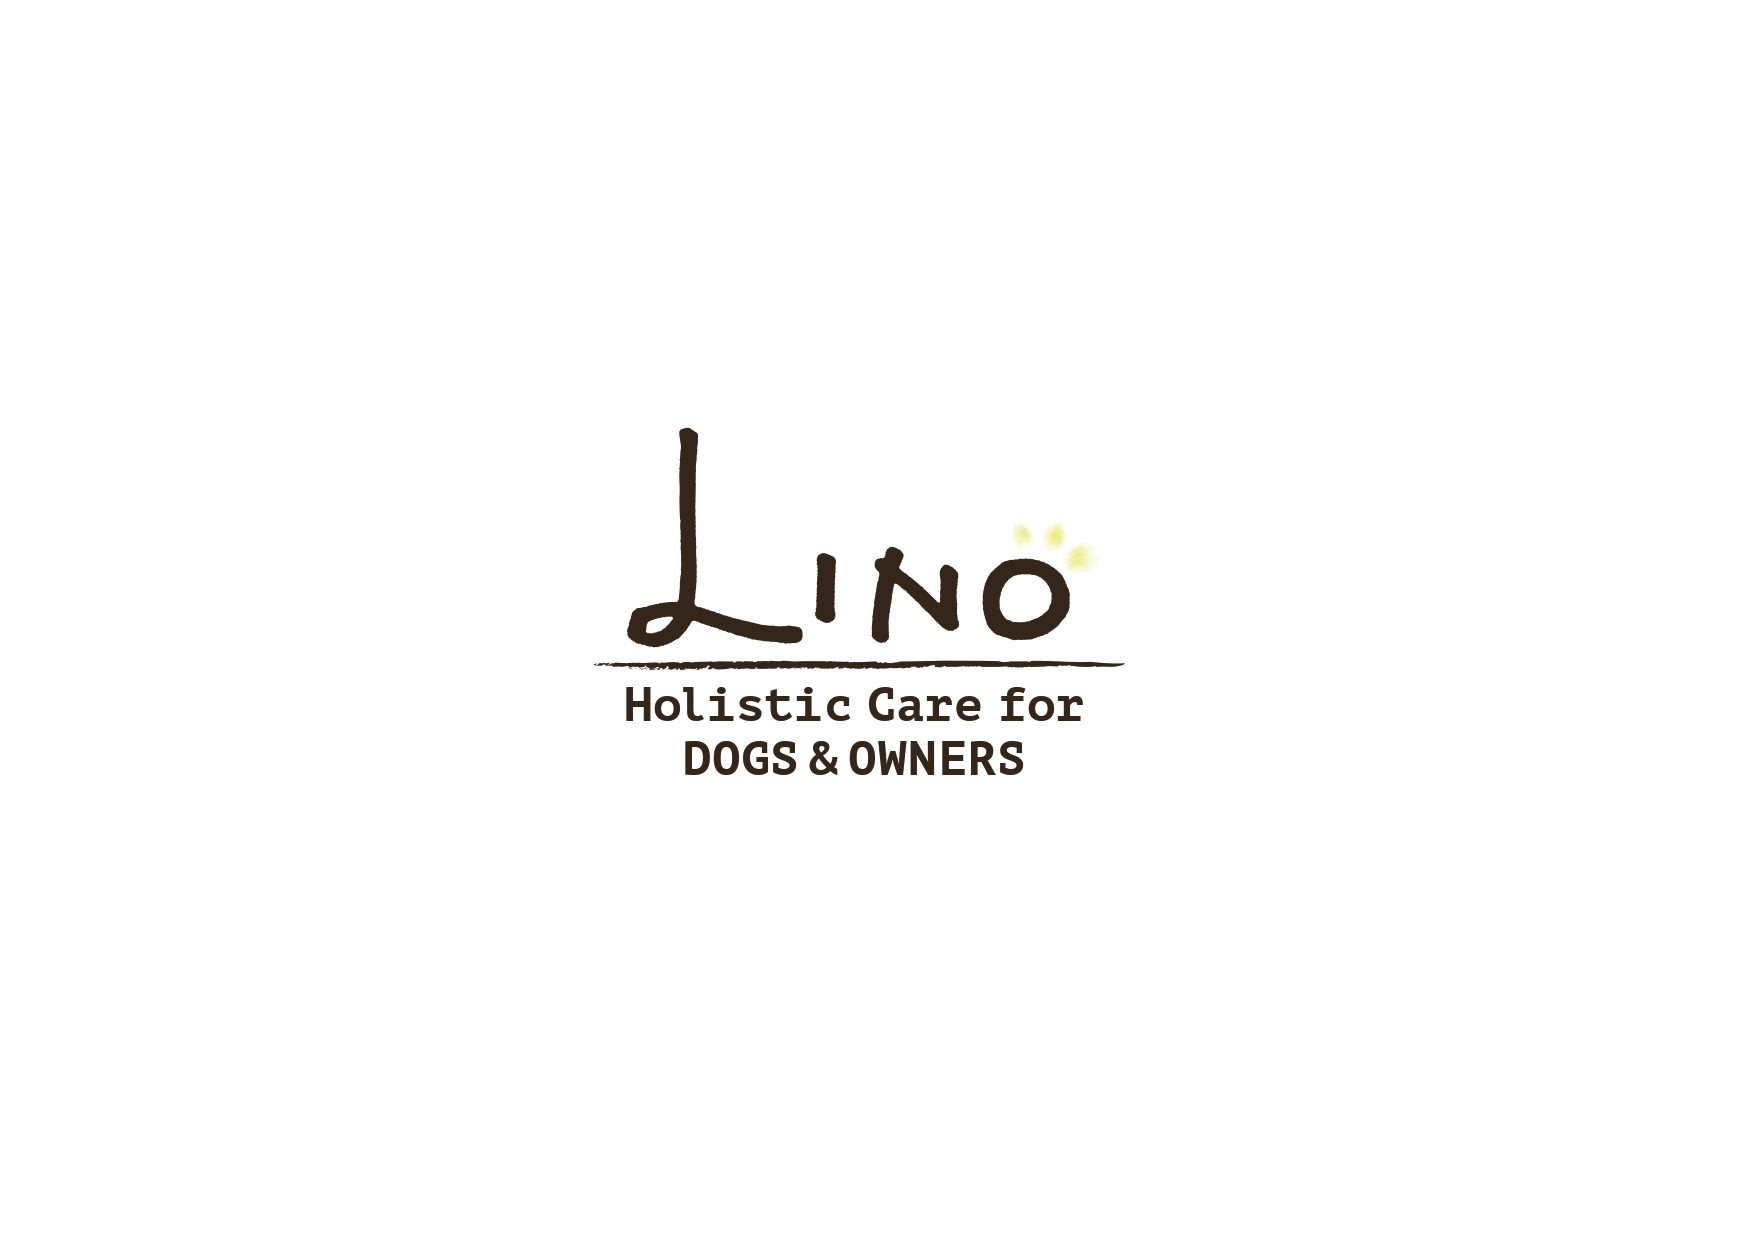 L I N O
Holistic Care for Dogs & Owners